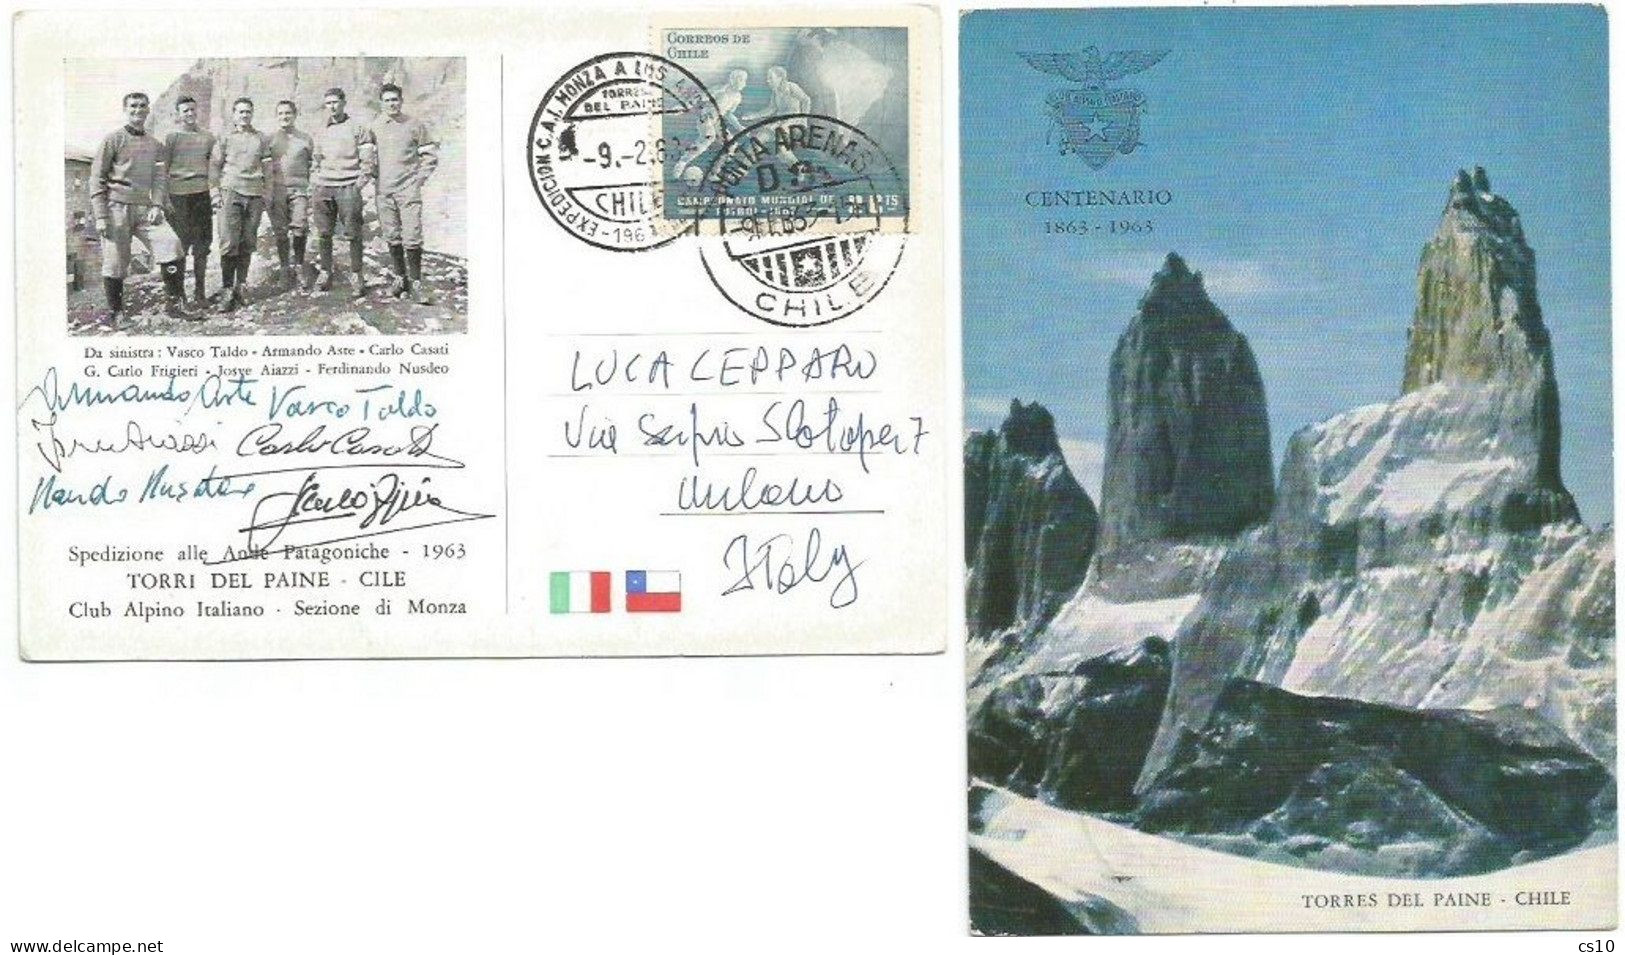 Mountaineering Ande Patagonia Chile Torres Paine Official Pcard Italy Expedition CAI Monza 1963 With 6 Handsigns !!! - Alpinismo